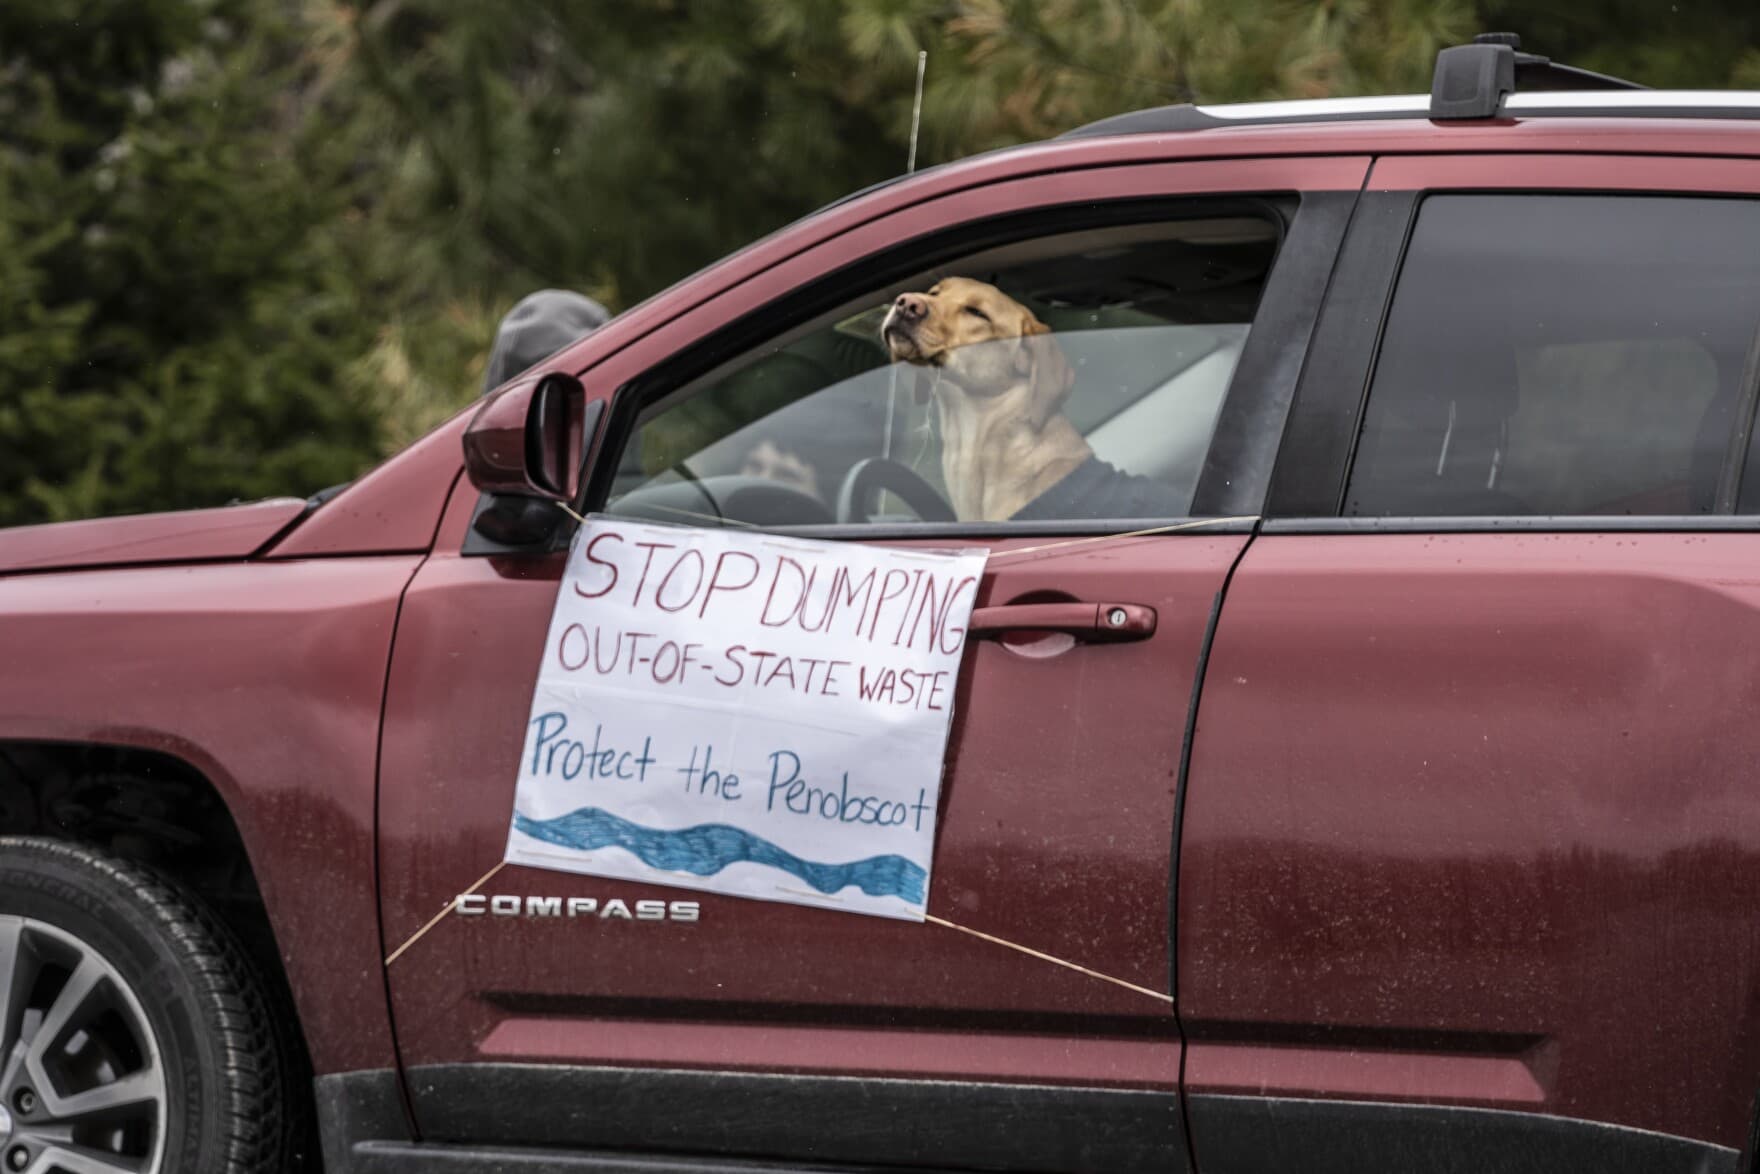 A canine protester outside Juniper Ridge Landfill in Old Town on April 22, 2021. (Nick Woodward/Maine Public)